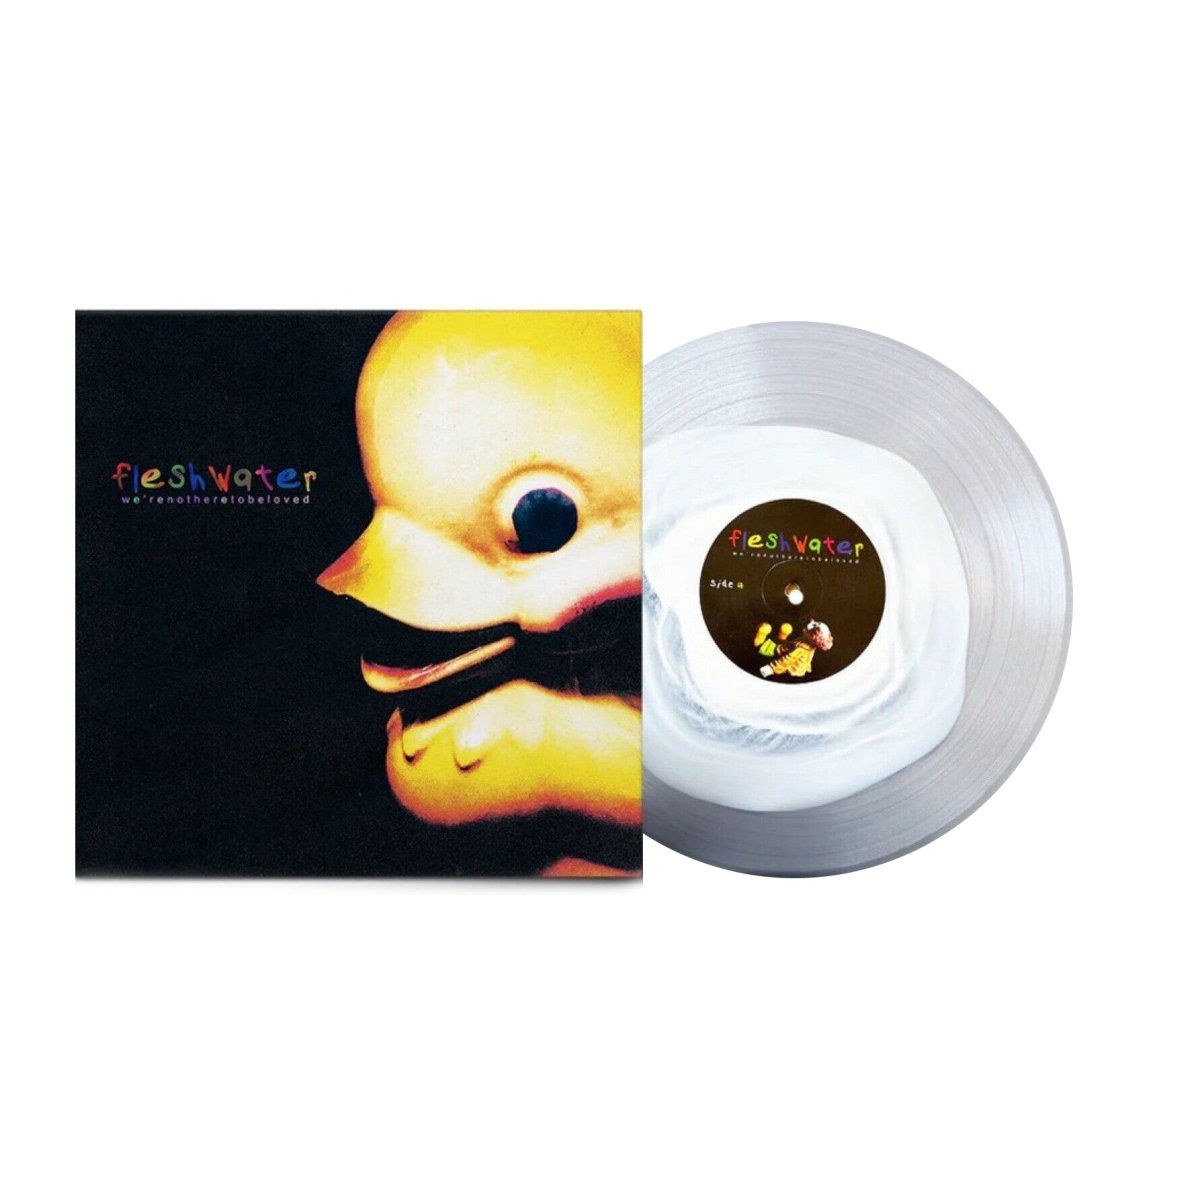 Fleshwater - We’re Not Here To Be Loved Vinyl